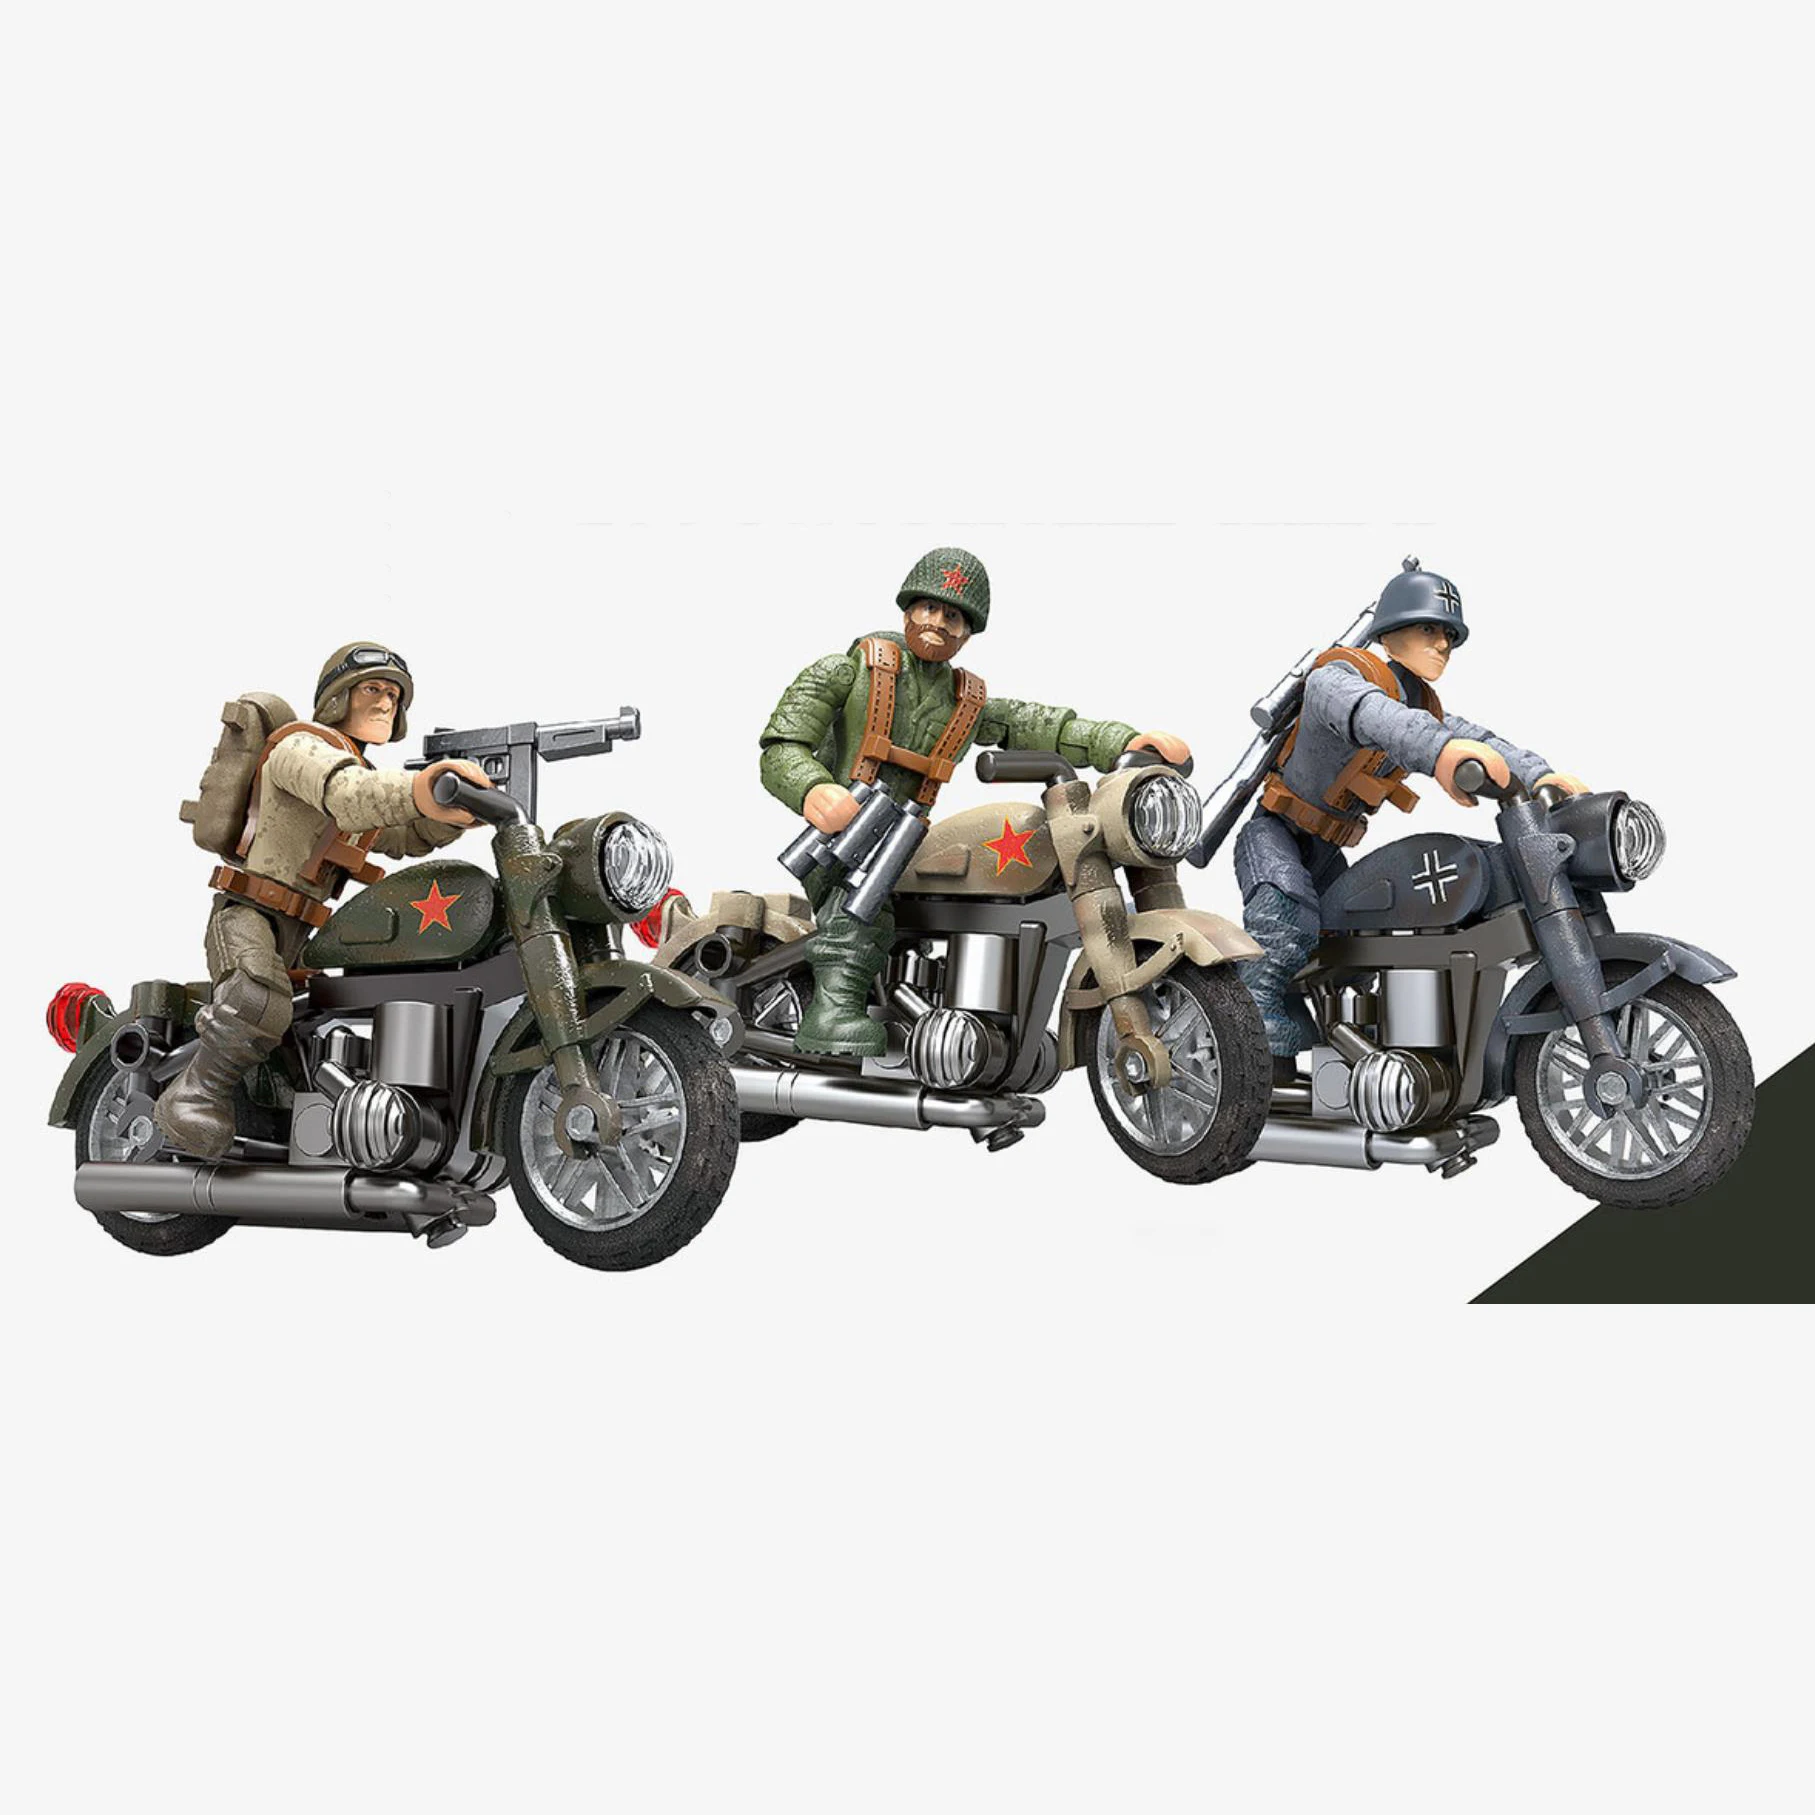 

World war military motorcycle building bricks ww2 Germany Soviet Union U.S.A army figures weapons mega blocks toys for gifts